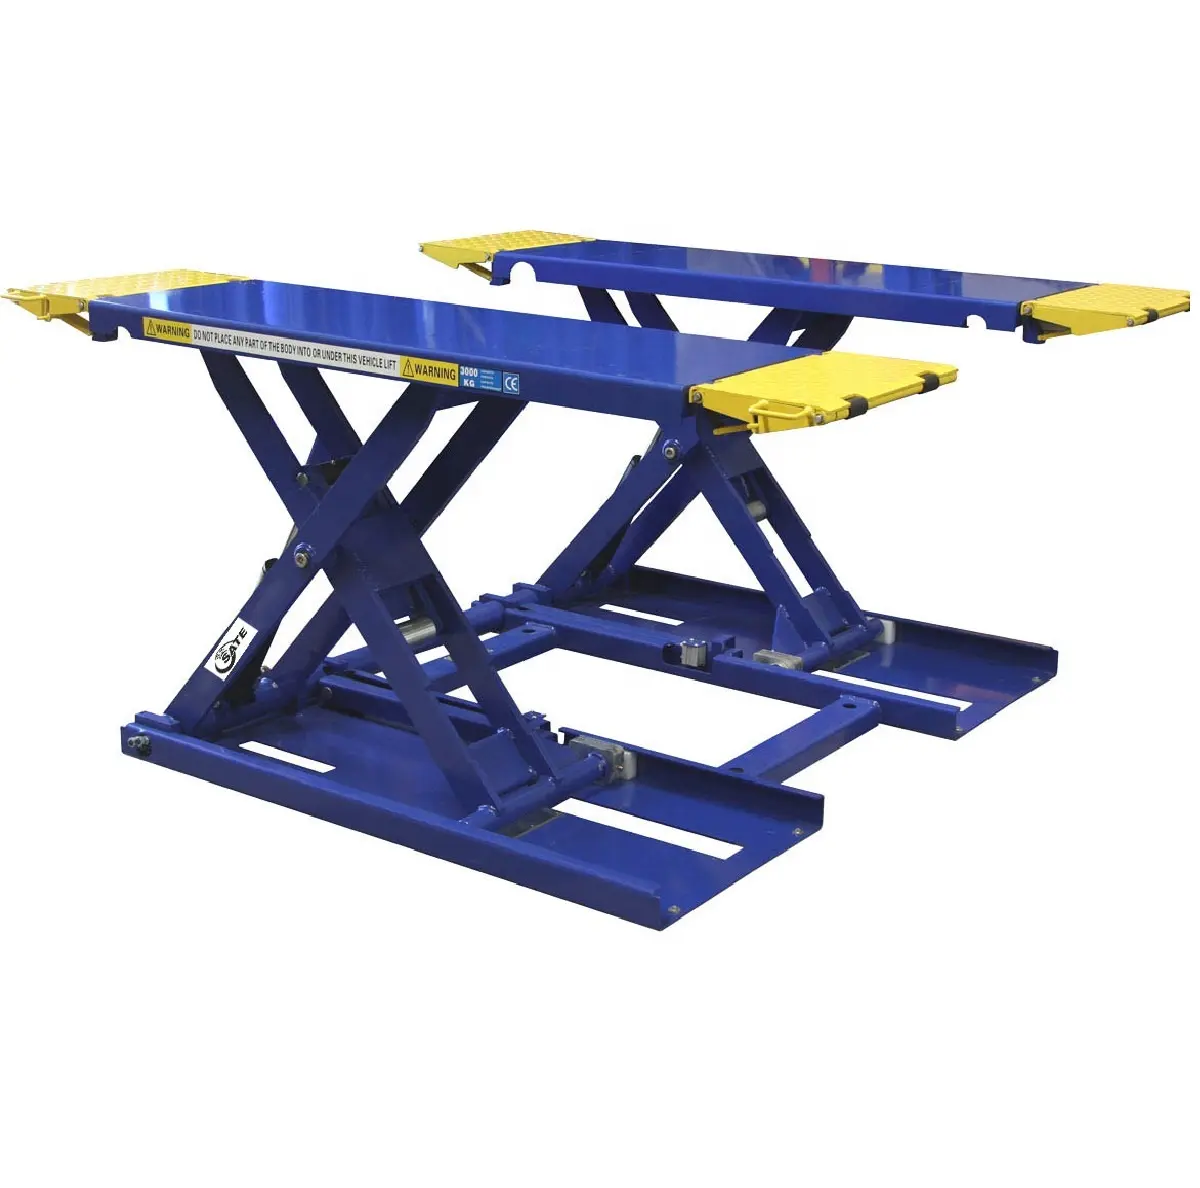 Tragbare Mid Rise 6600lbs <span class=keywords><strong>Auto</strong></span> Jack Lifting hydraulische Schere <span class=keywords><strong>Auto</strong></span> Lift für die Autore paratur